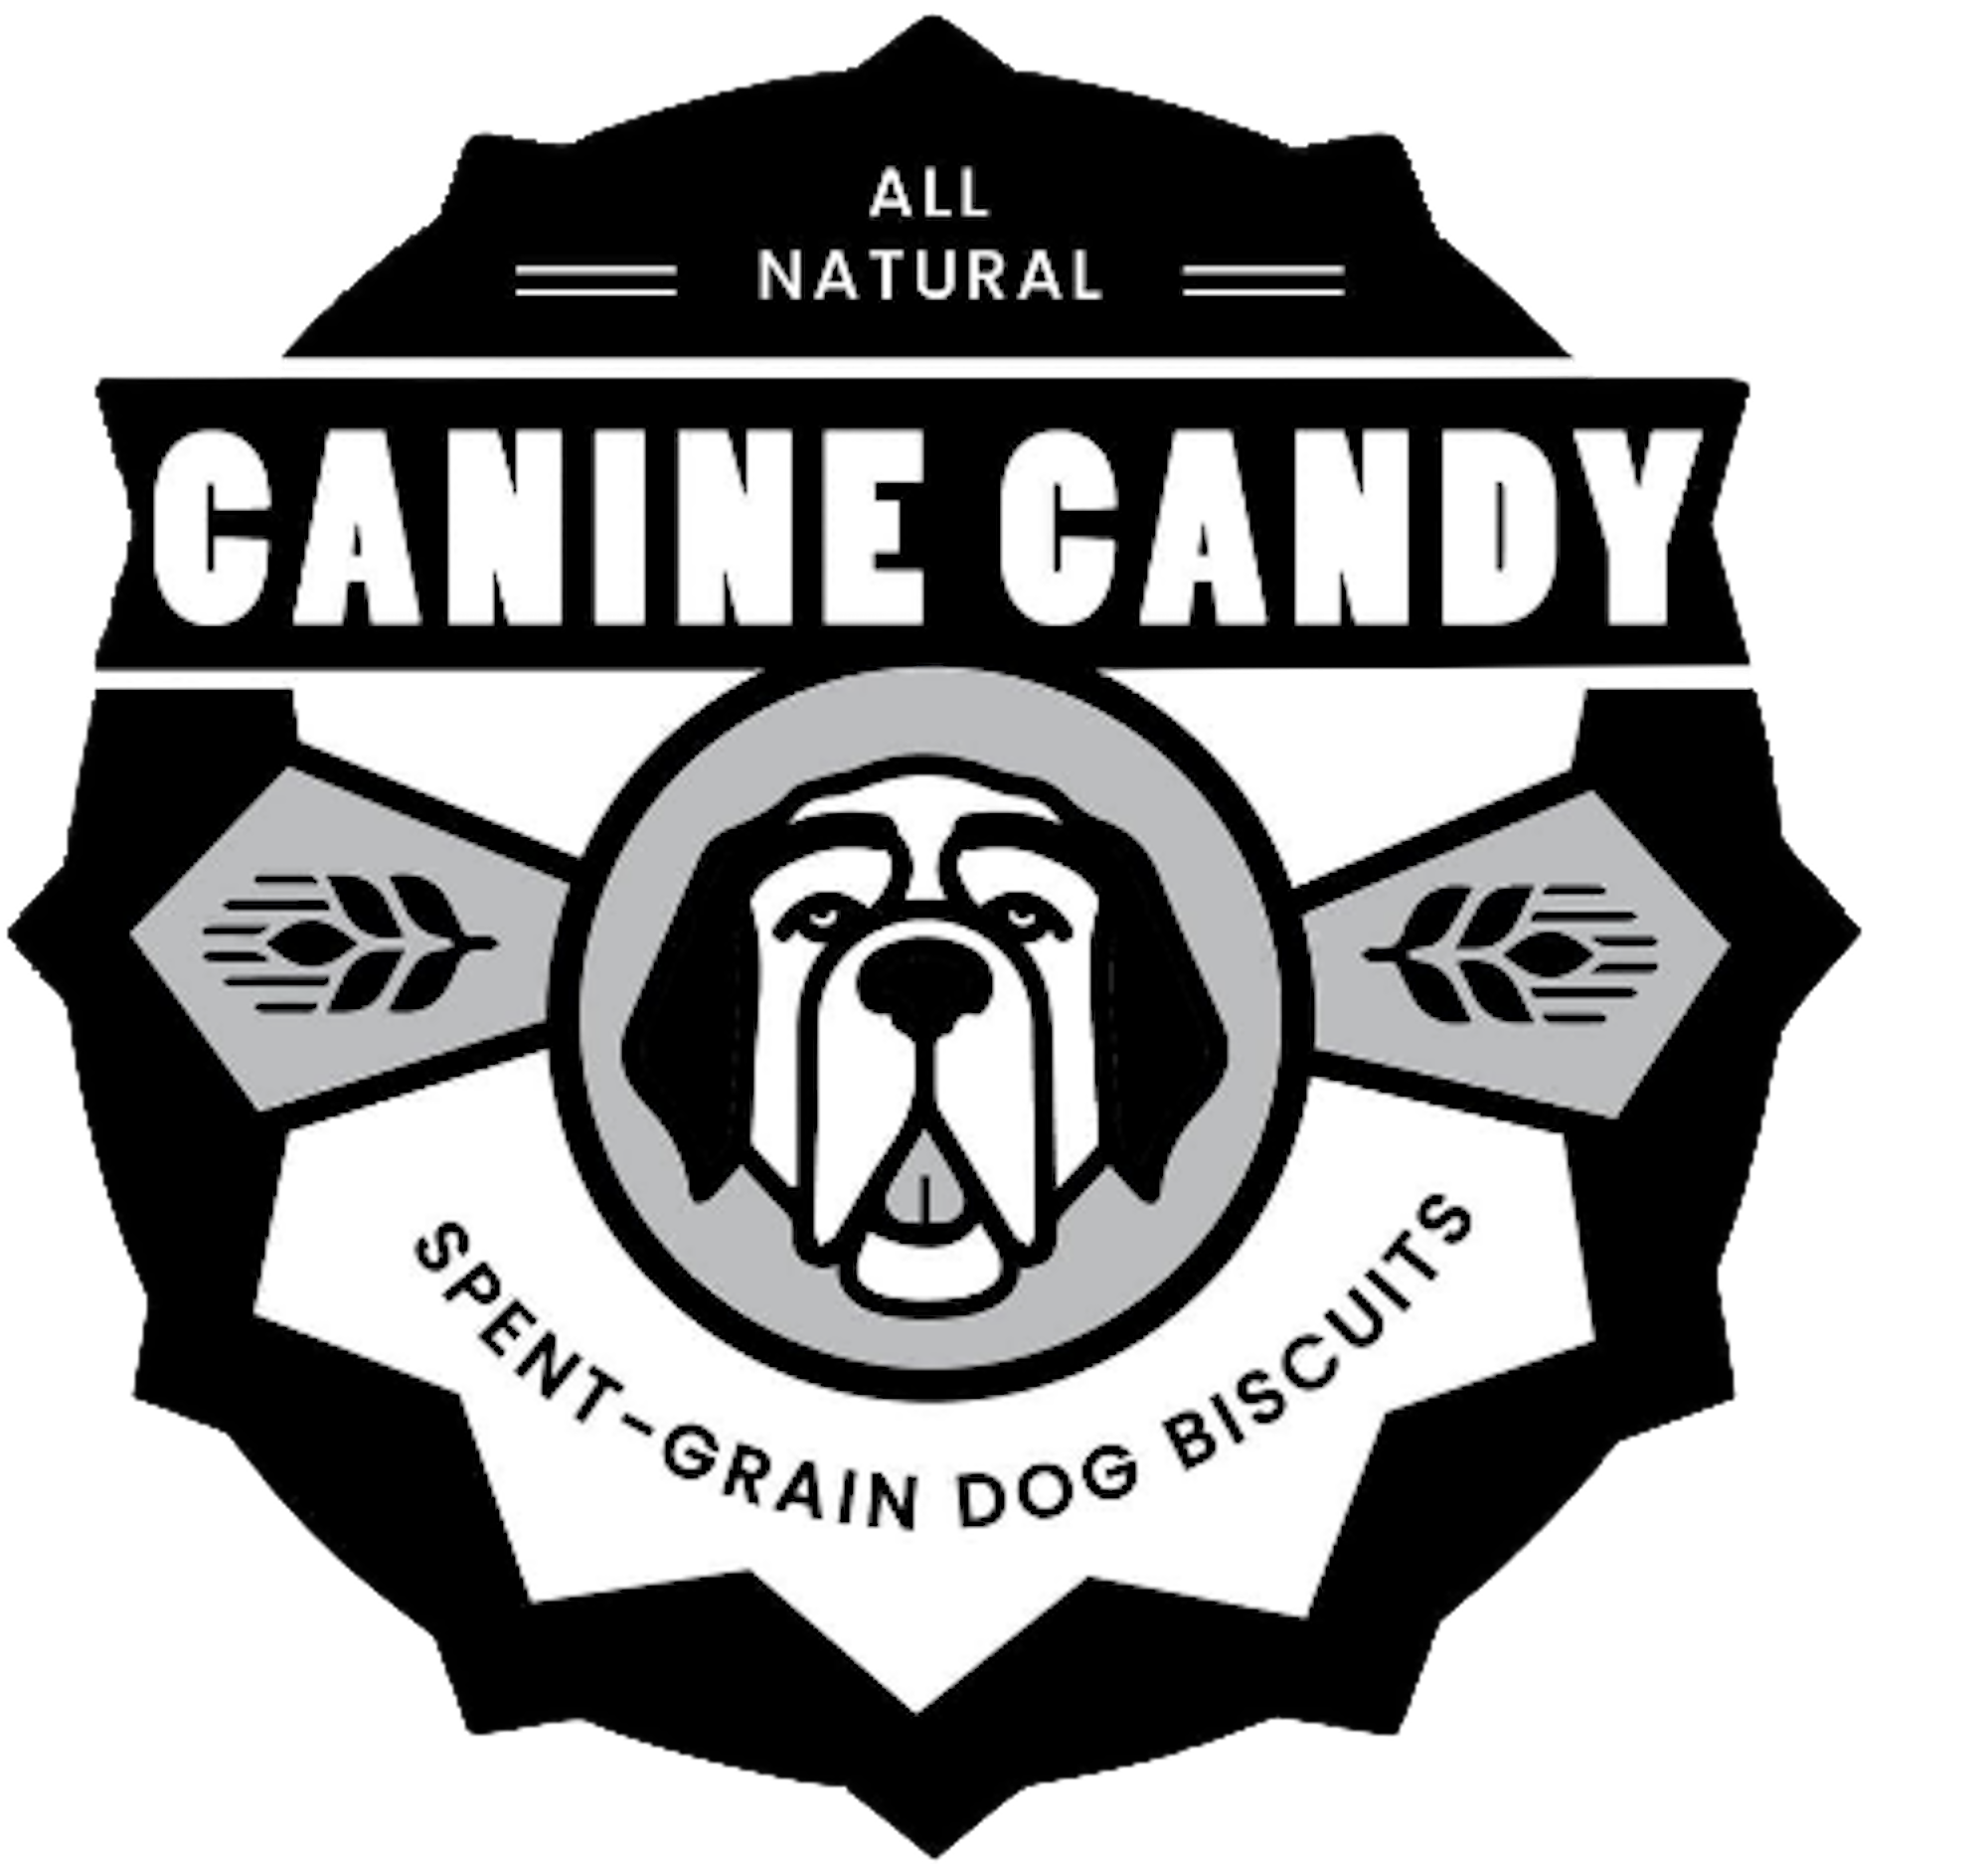 CANINE CANDY